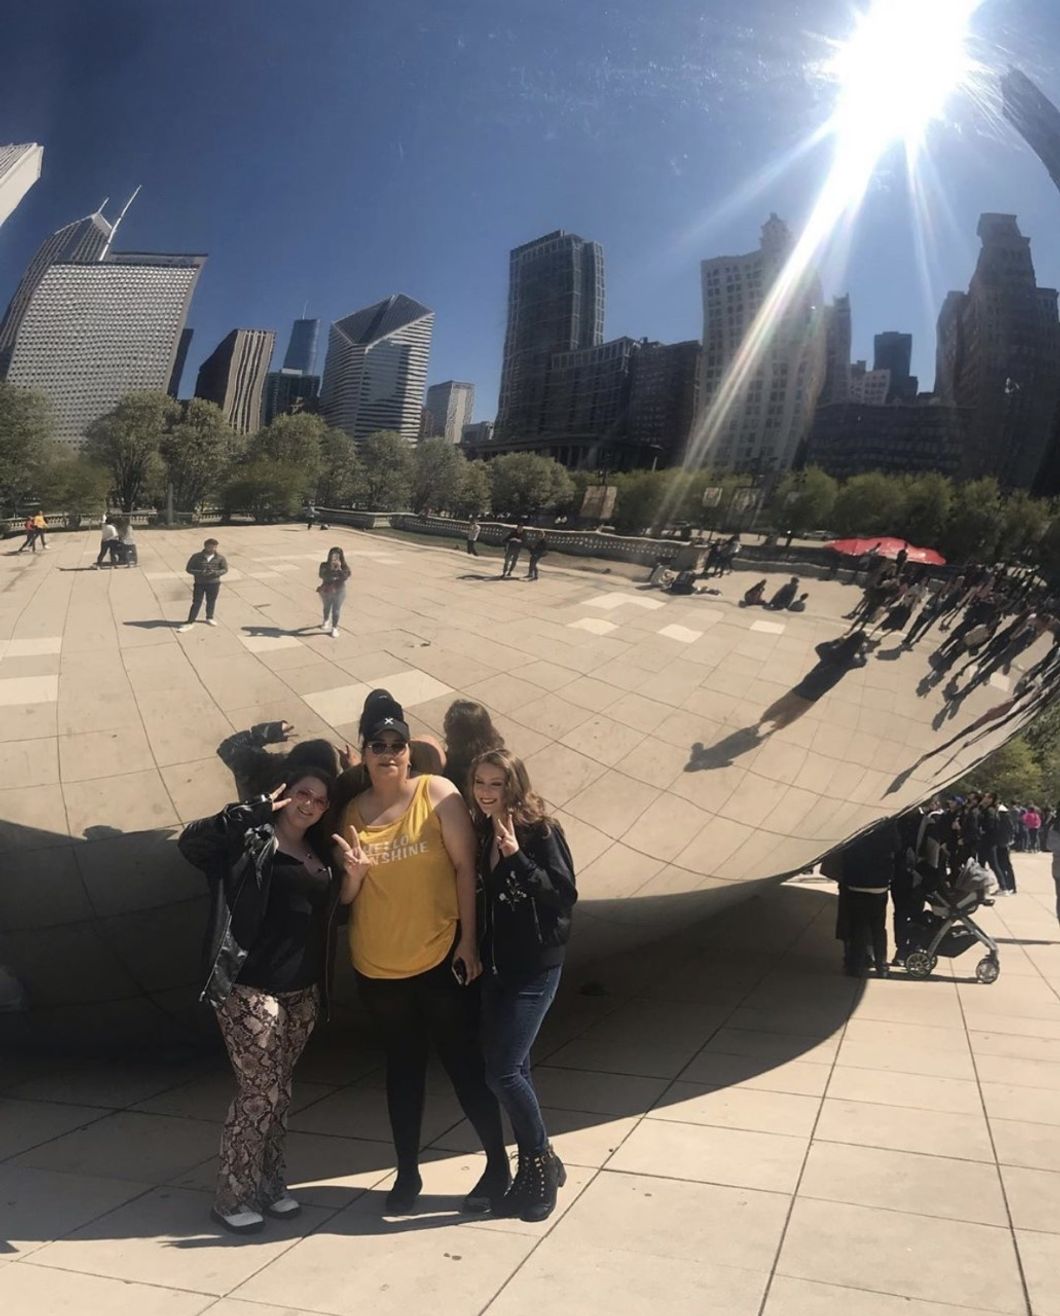 My Friends And I Made A Girls' Trip To Chicago, And We Did It RIGHT